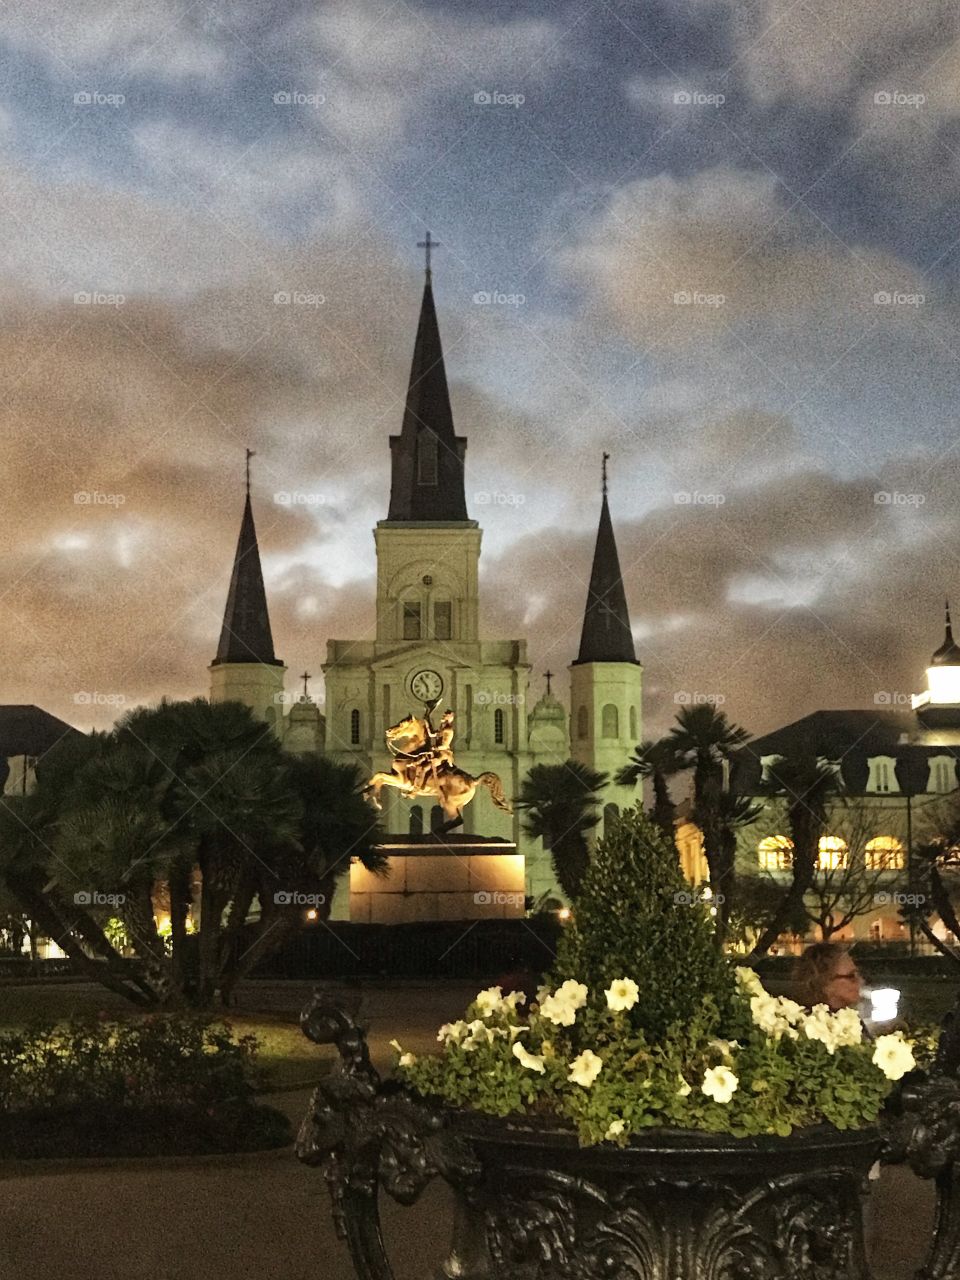 Jackson Square in New Orleans. It’s not just a square. This is St Louis Cathedral. One of the most spectacular and popular sites in New Orleans. It is still a fully operational church.